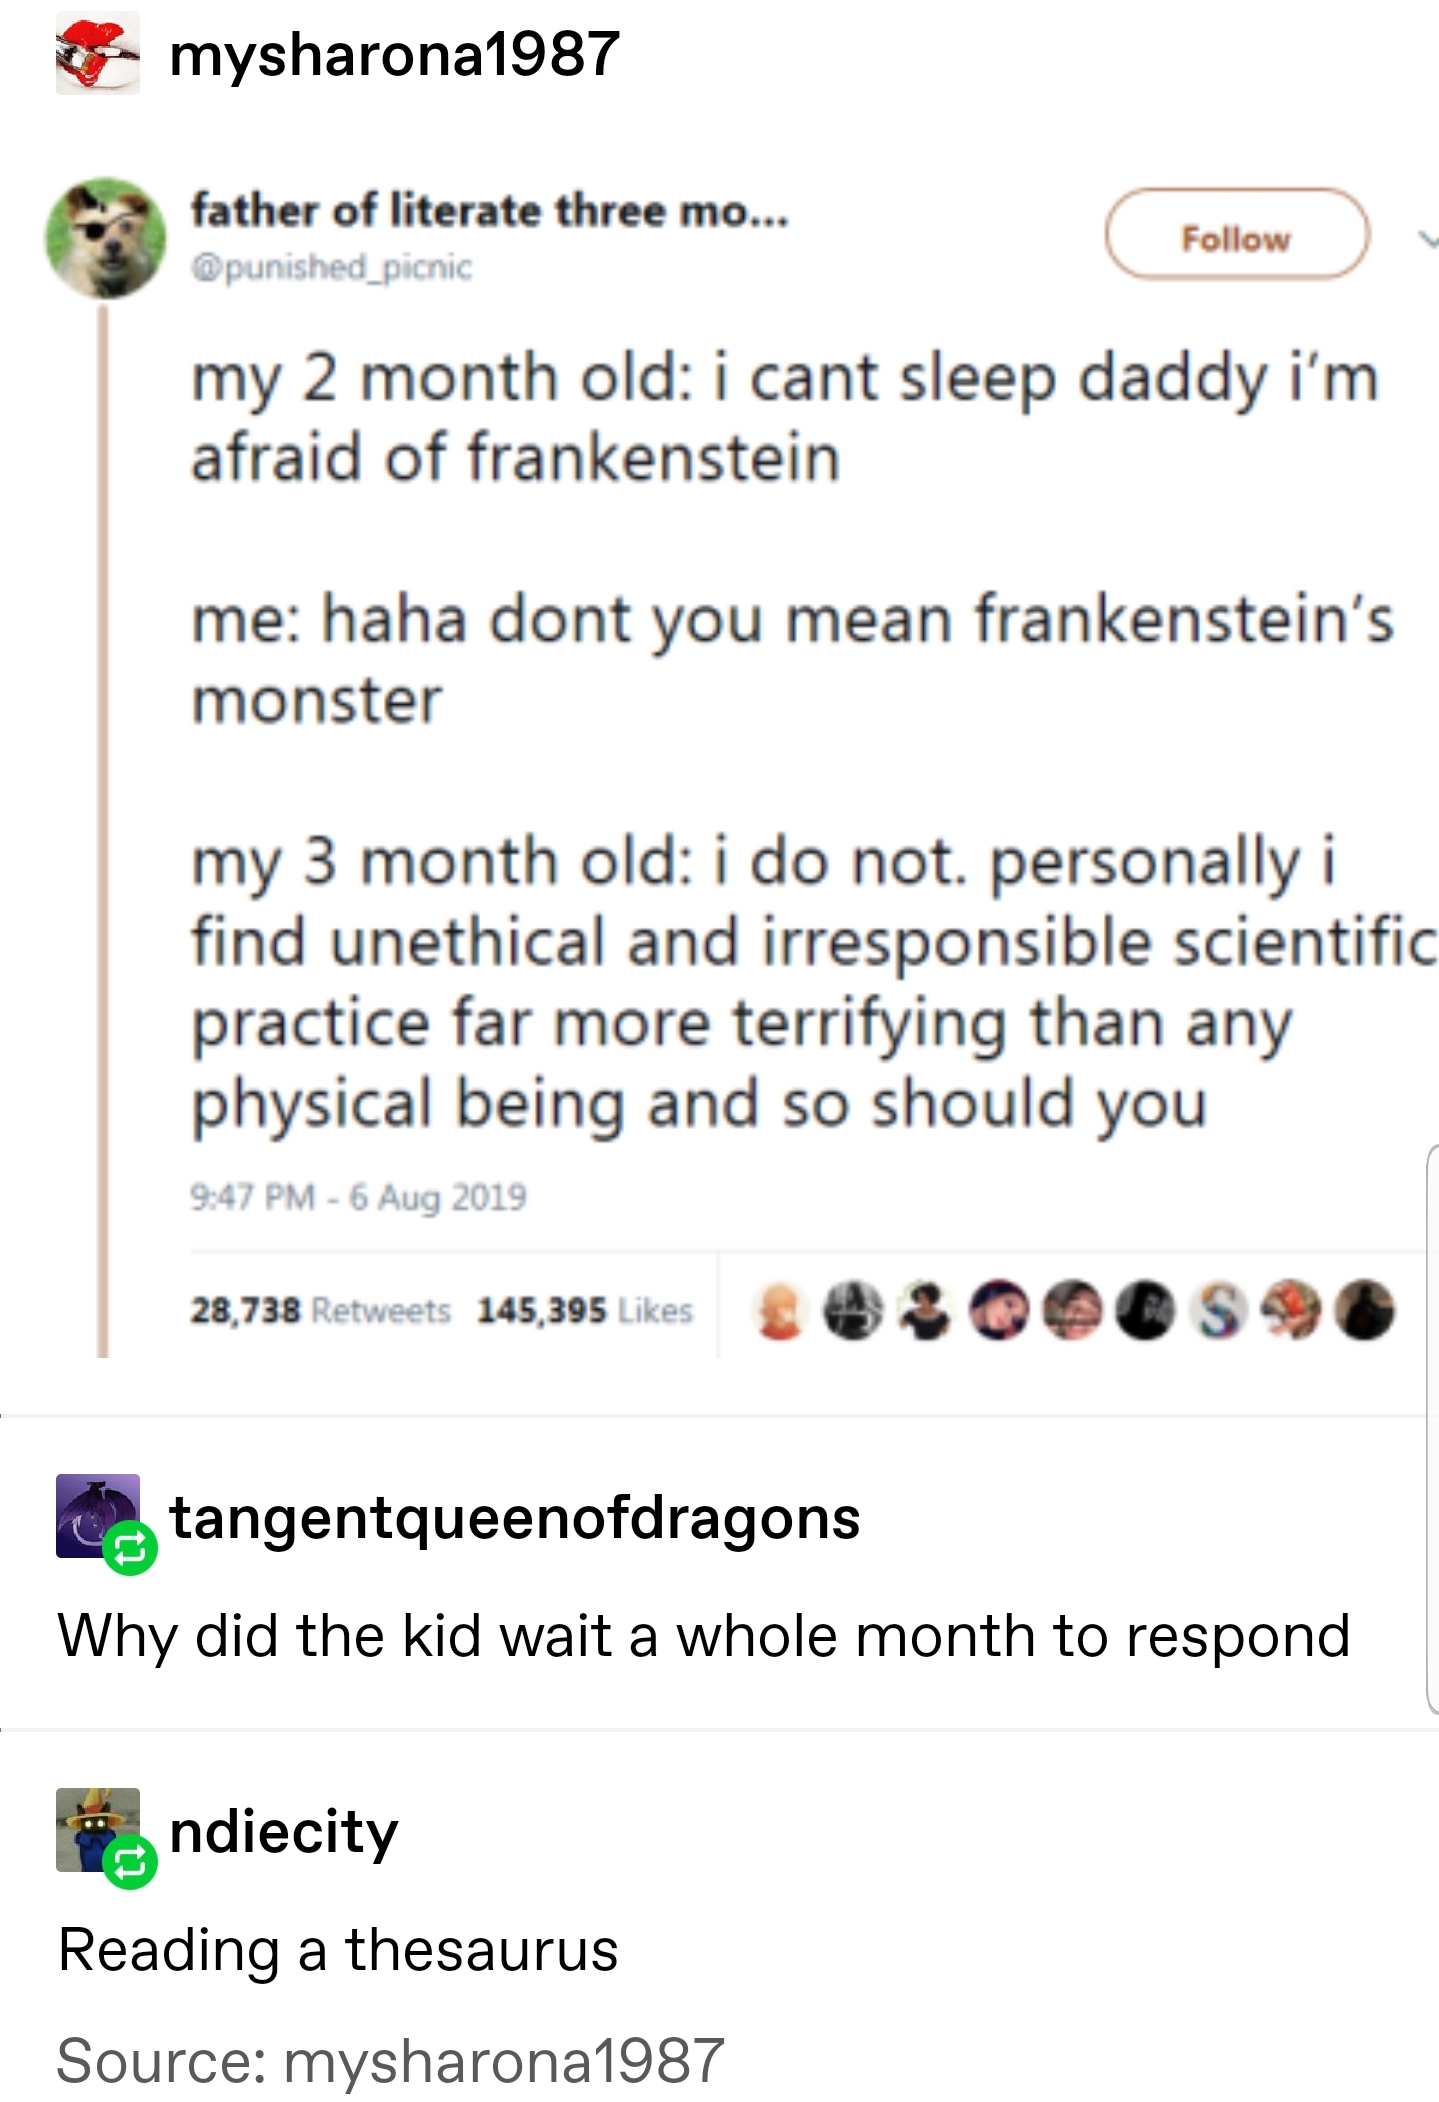 my 2 month old: i cant sleep daddy i'm afraid of frankenstein me: haha don't you mean frankenstein's monster my 3 month old: i do not. personally i find unethical and irresponsible scientific practice far more terrifying than any physical being and so sho